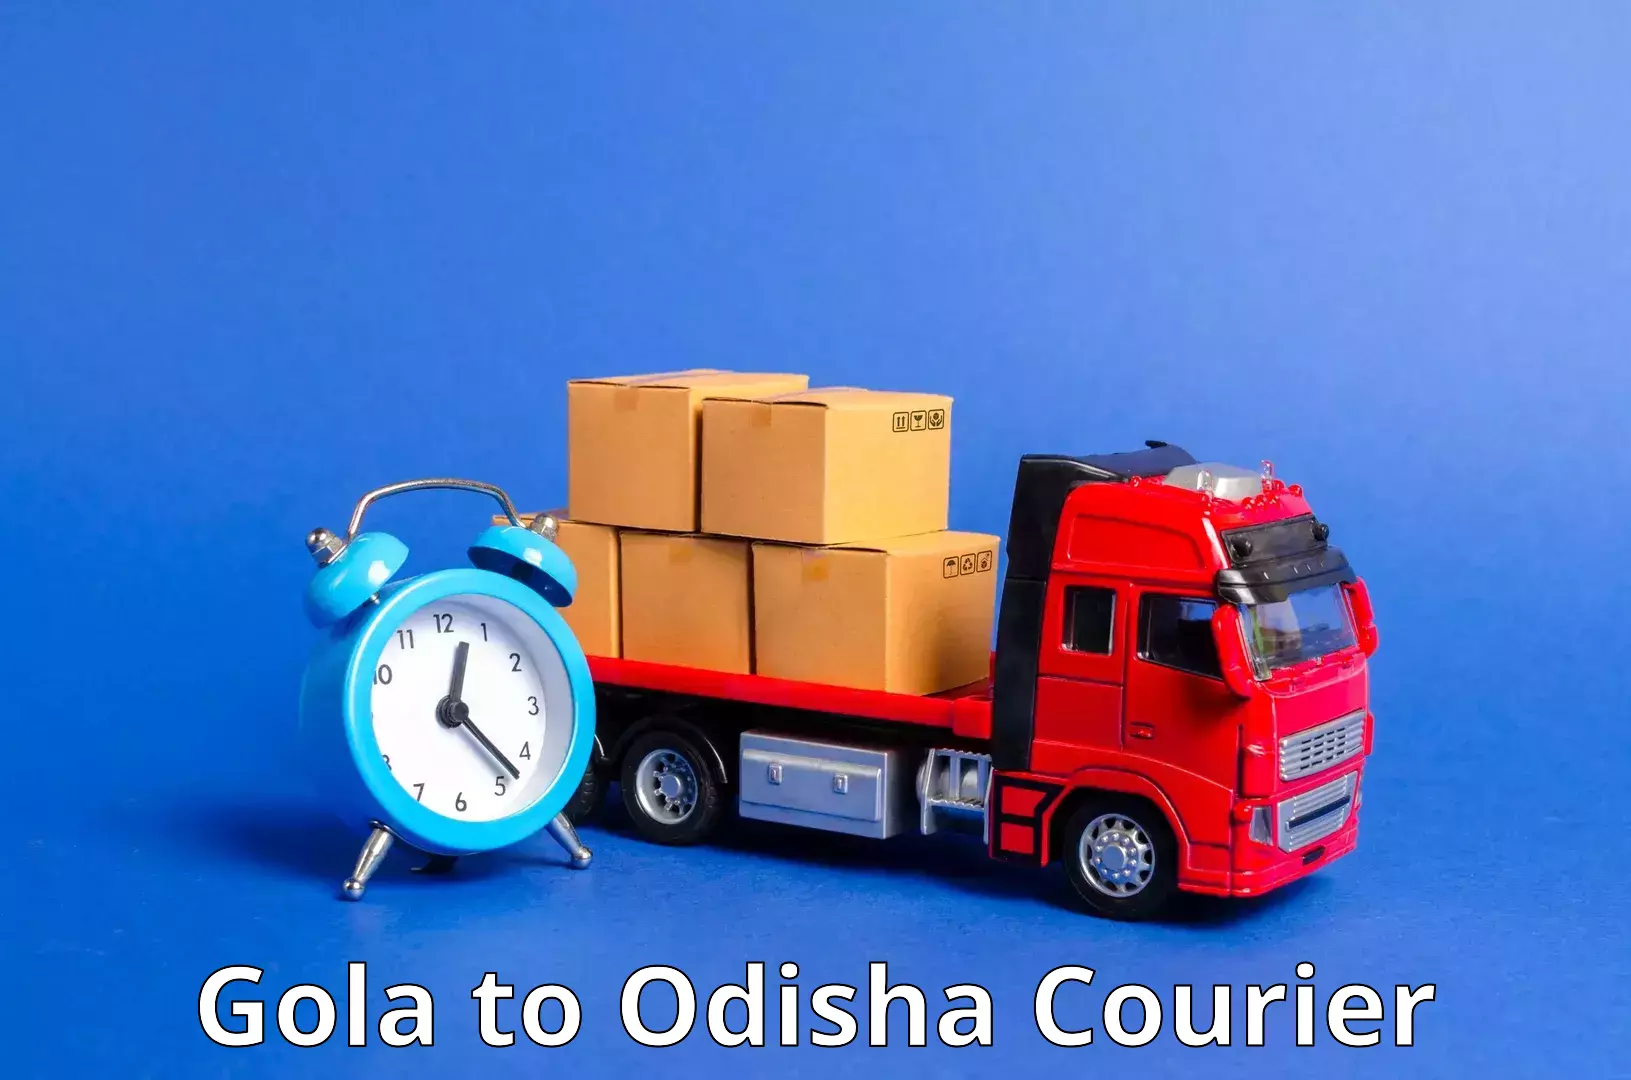 Next day courier Gola to Jharsuguda